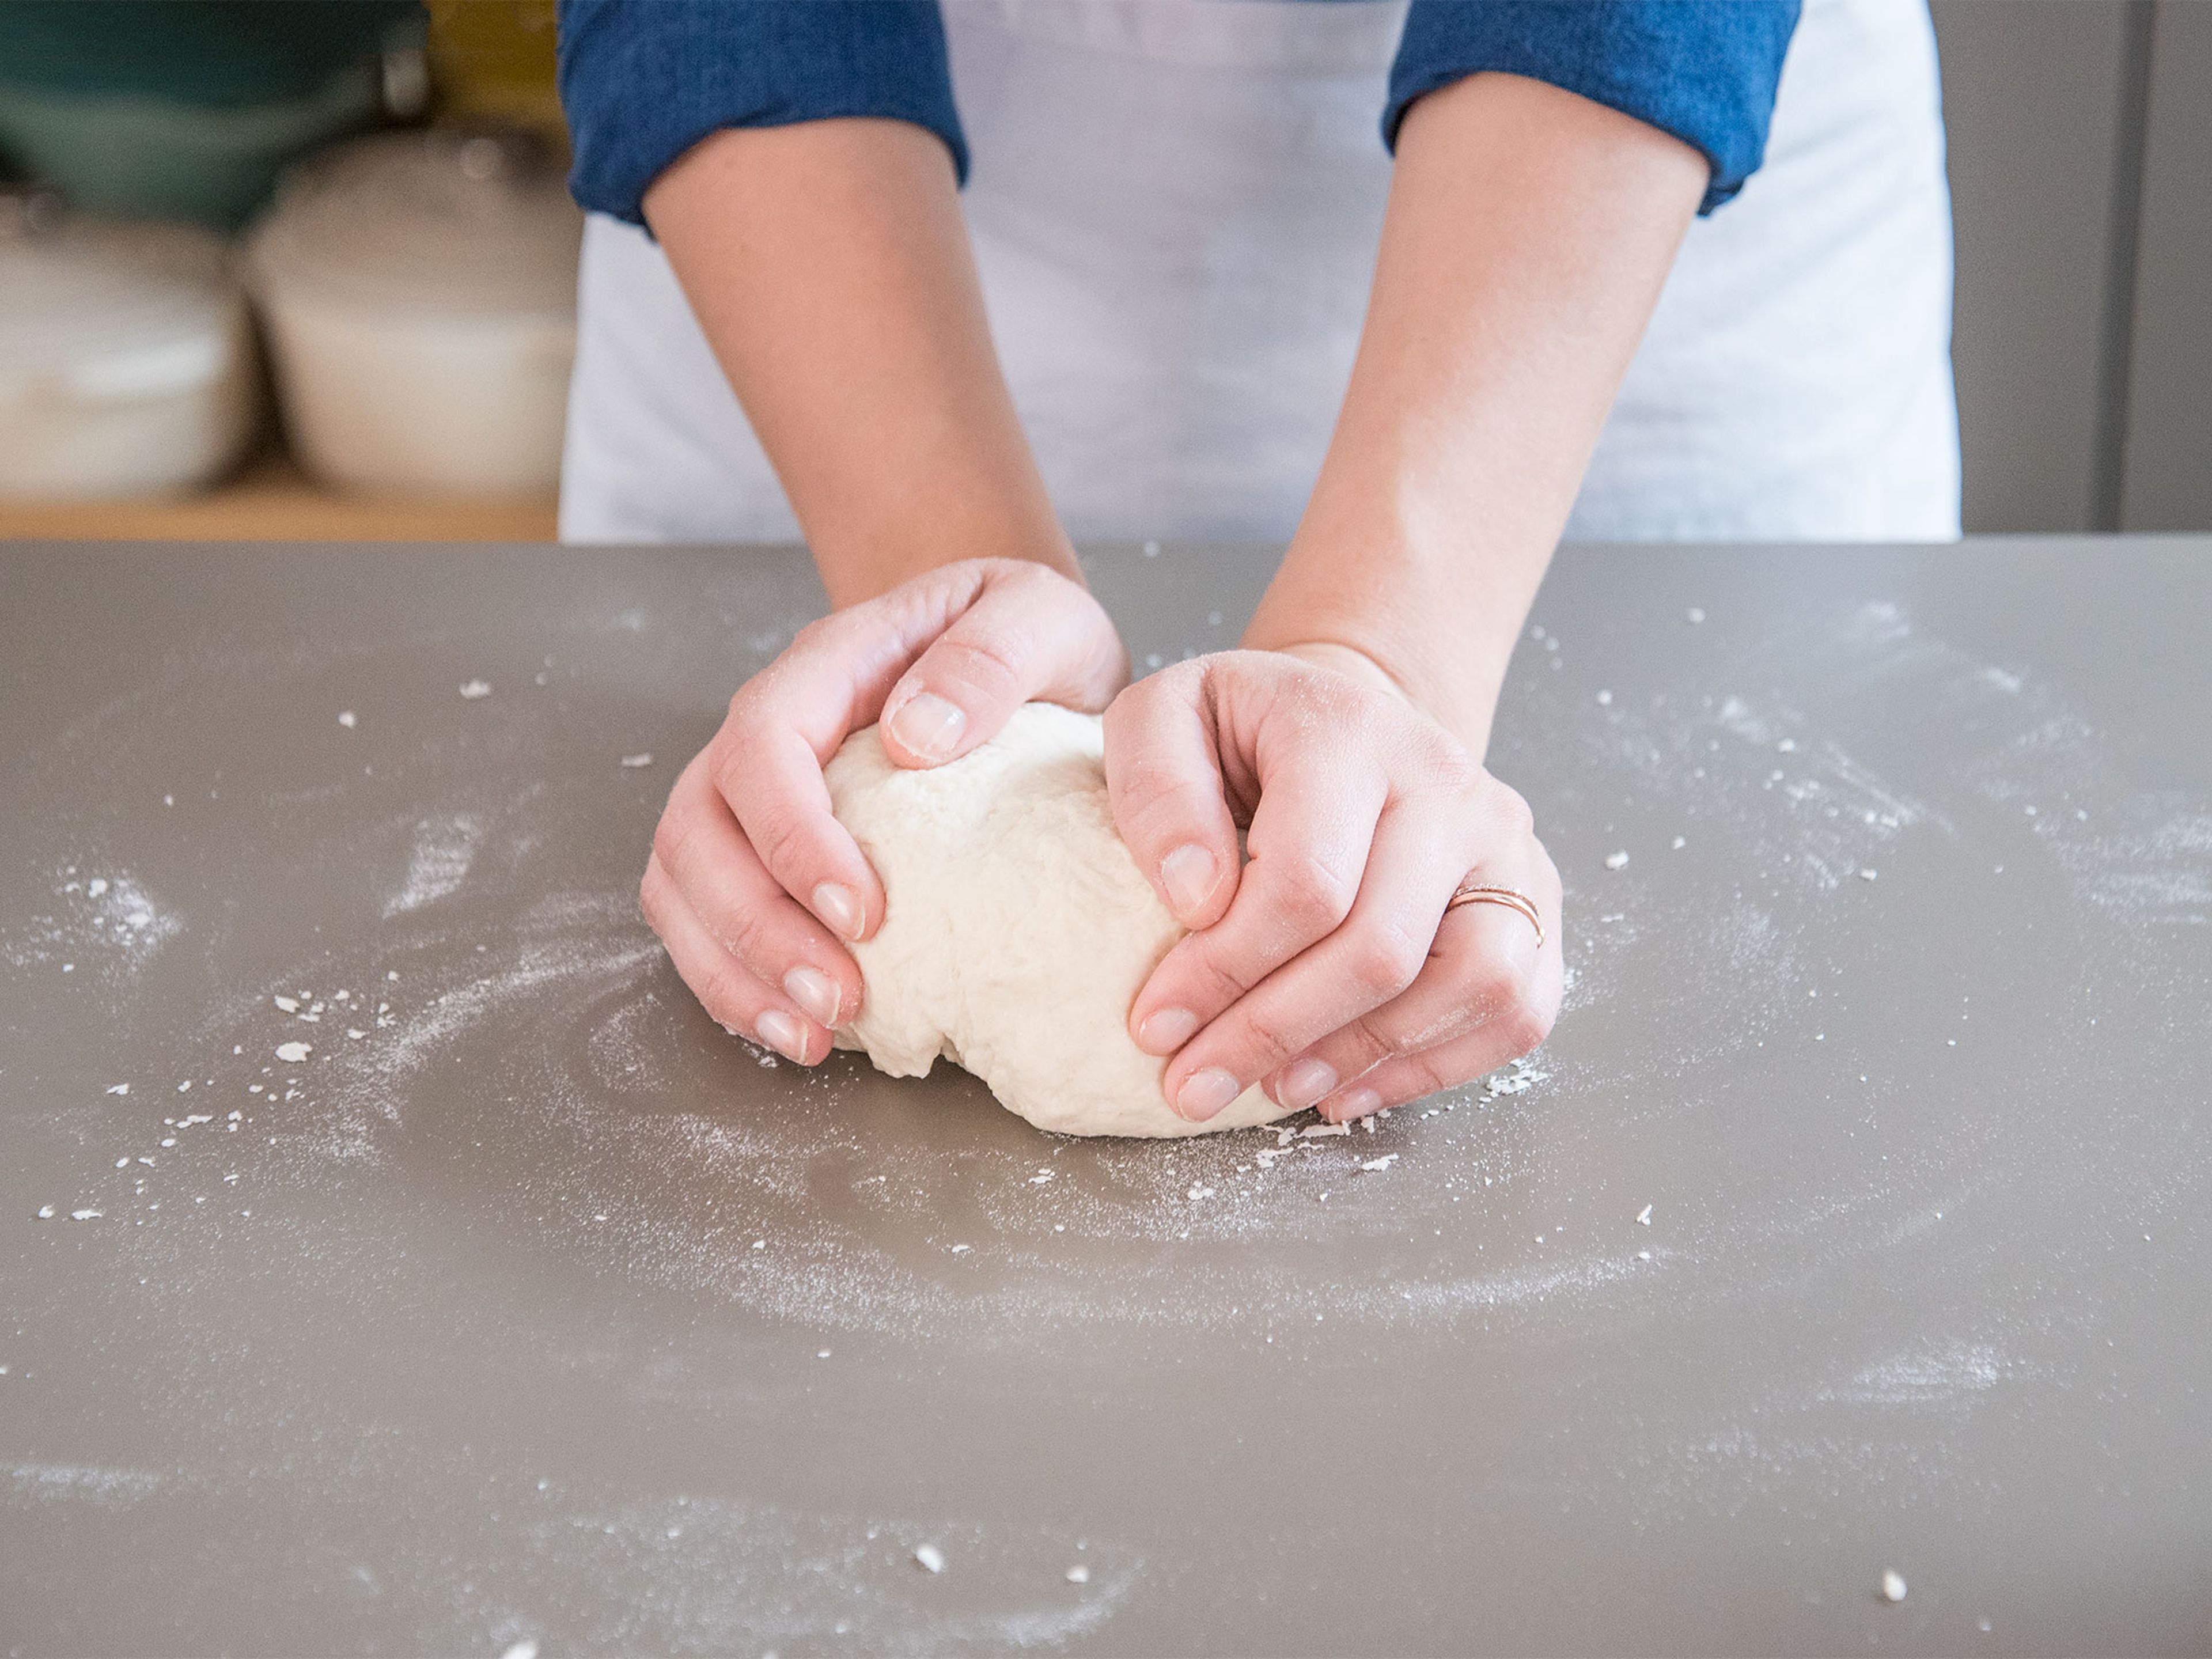 Add yeast to lukewarm water and stir until dissolved. Add flour, salt, sugar, and butter and knead for approx. 4 – 5 min. until dough is smooth and elastic.